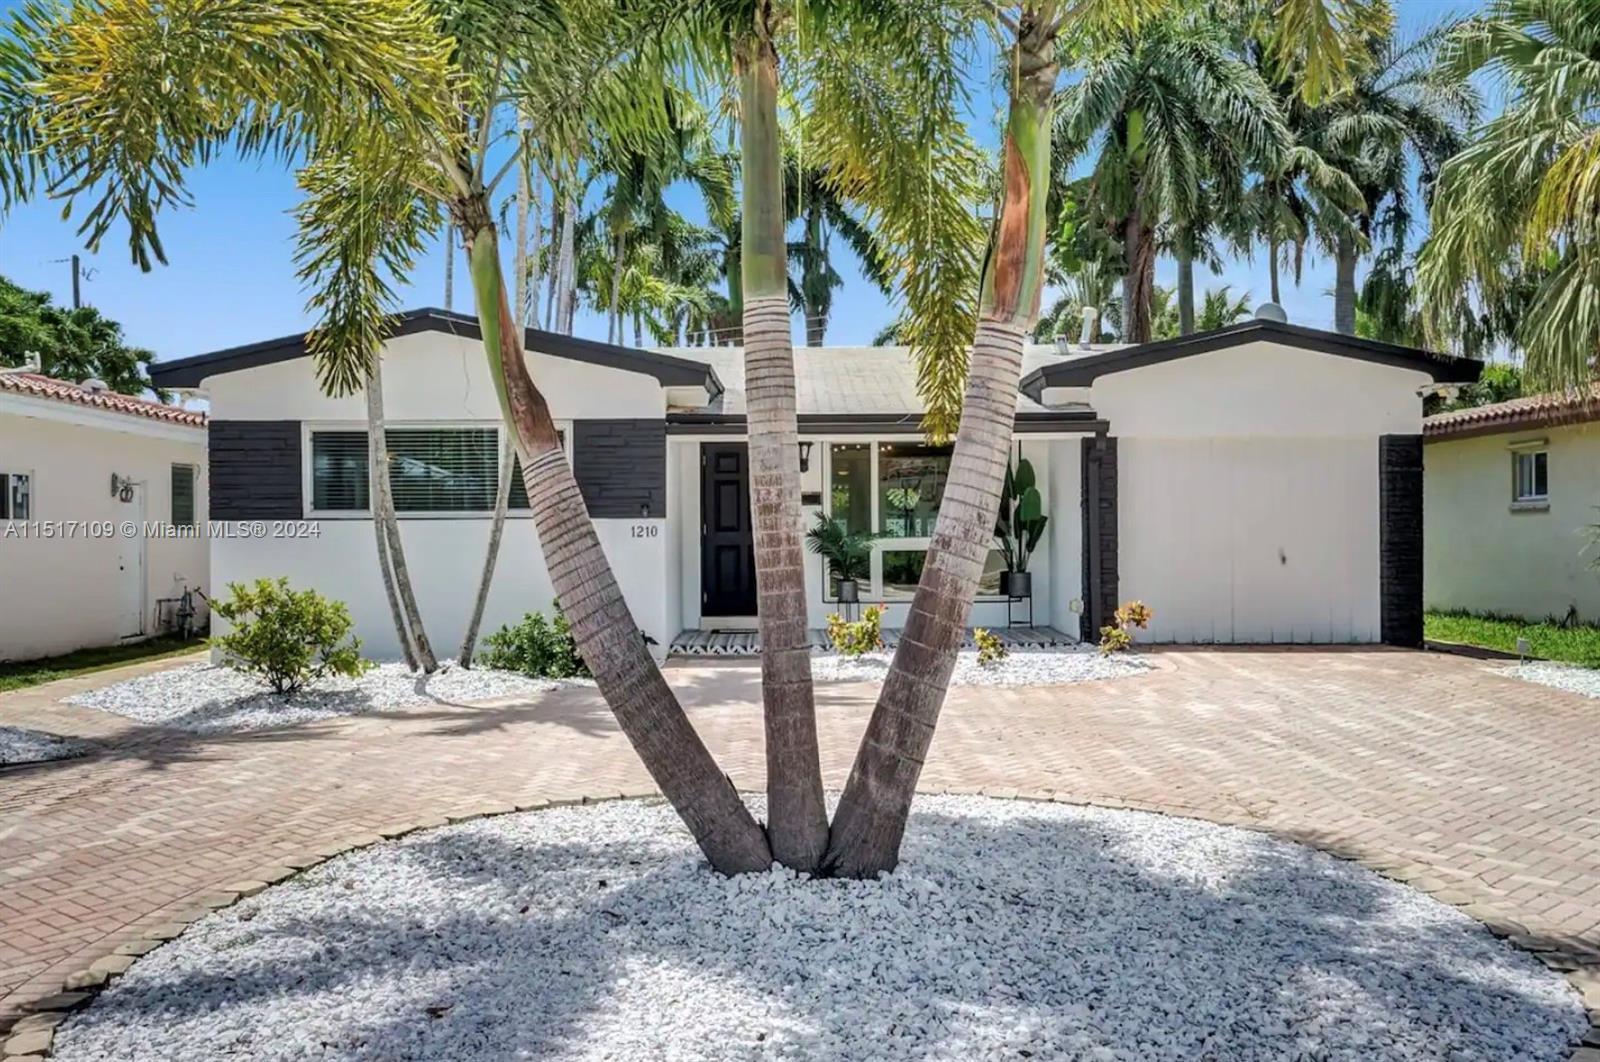 Experience Hollywood, FL, by visiting this elegant and spacious home nestled right in the heart of t